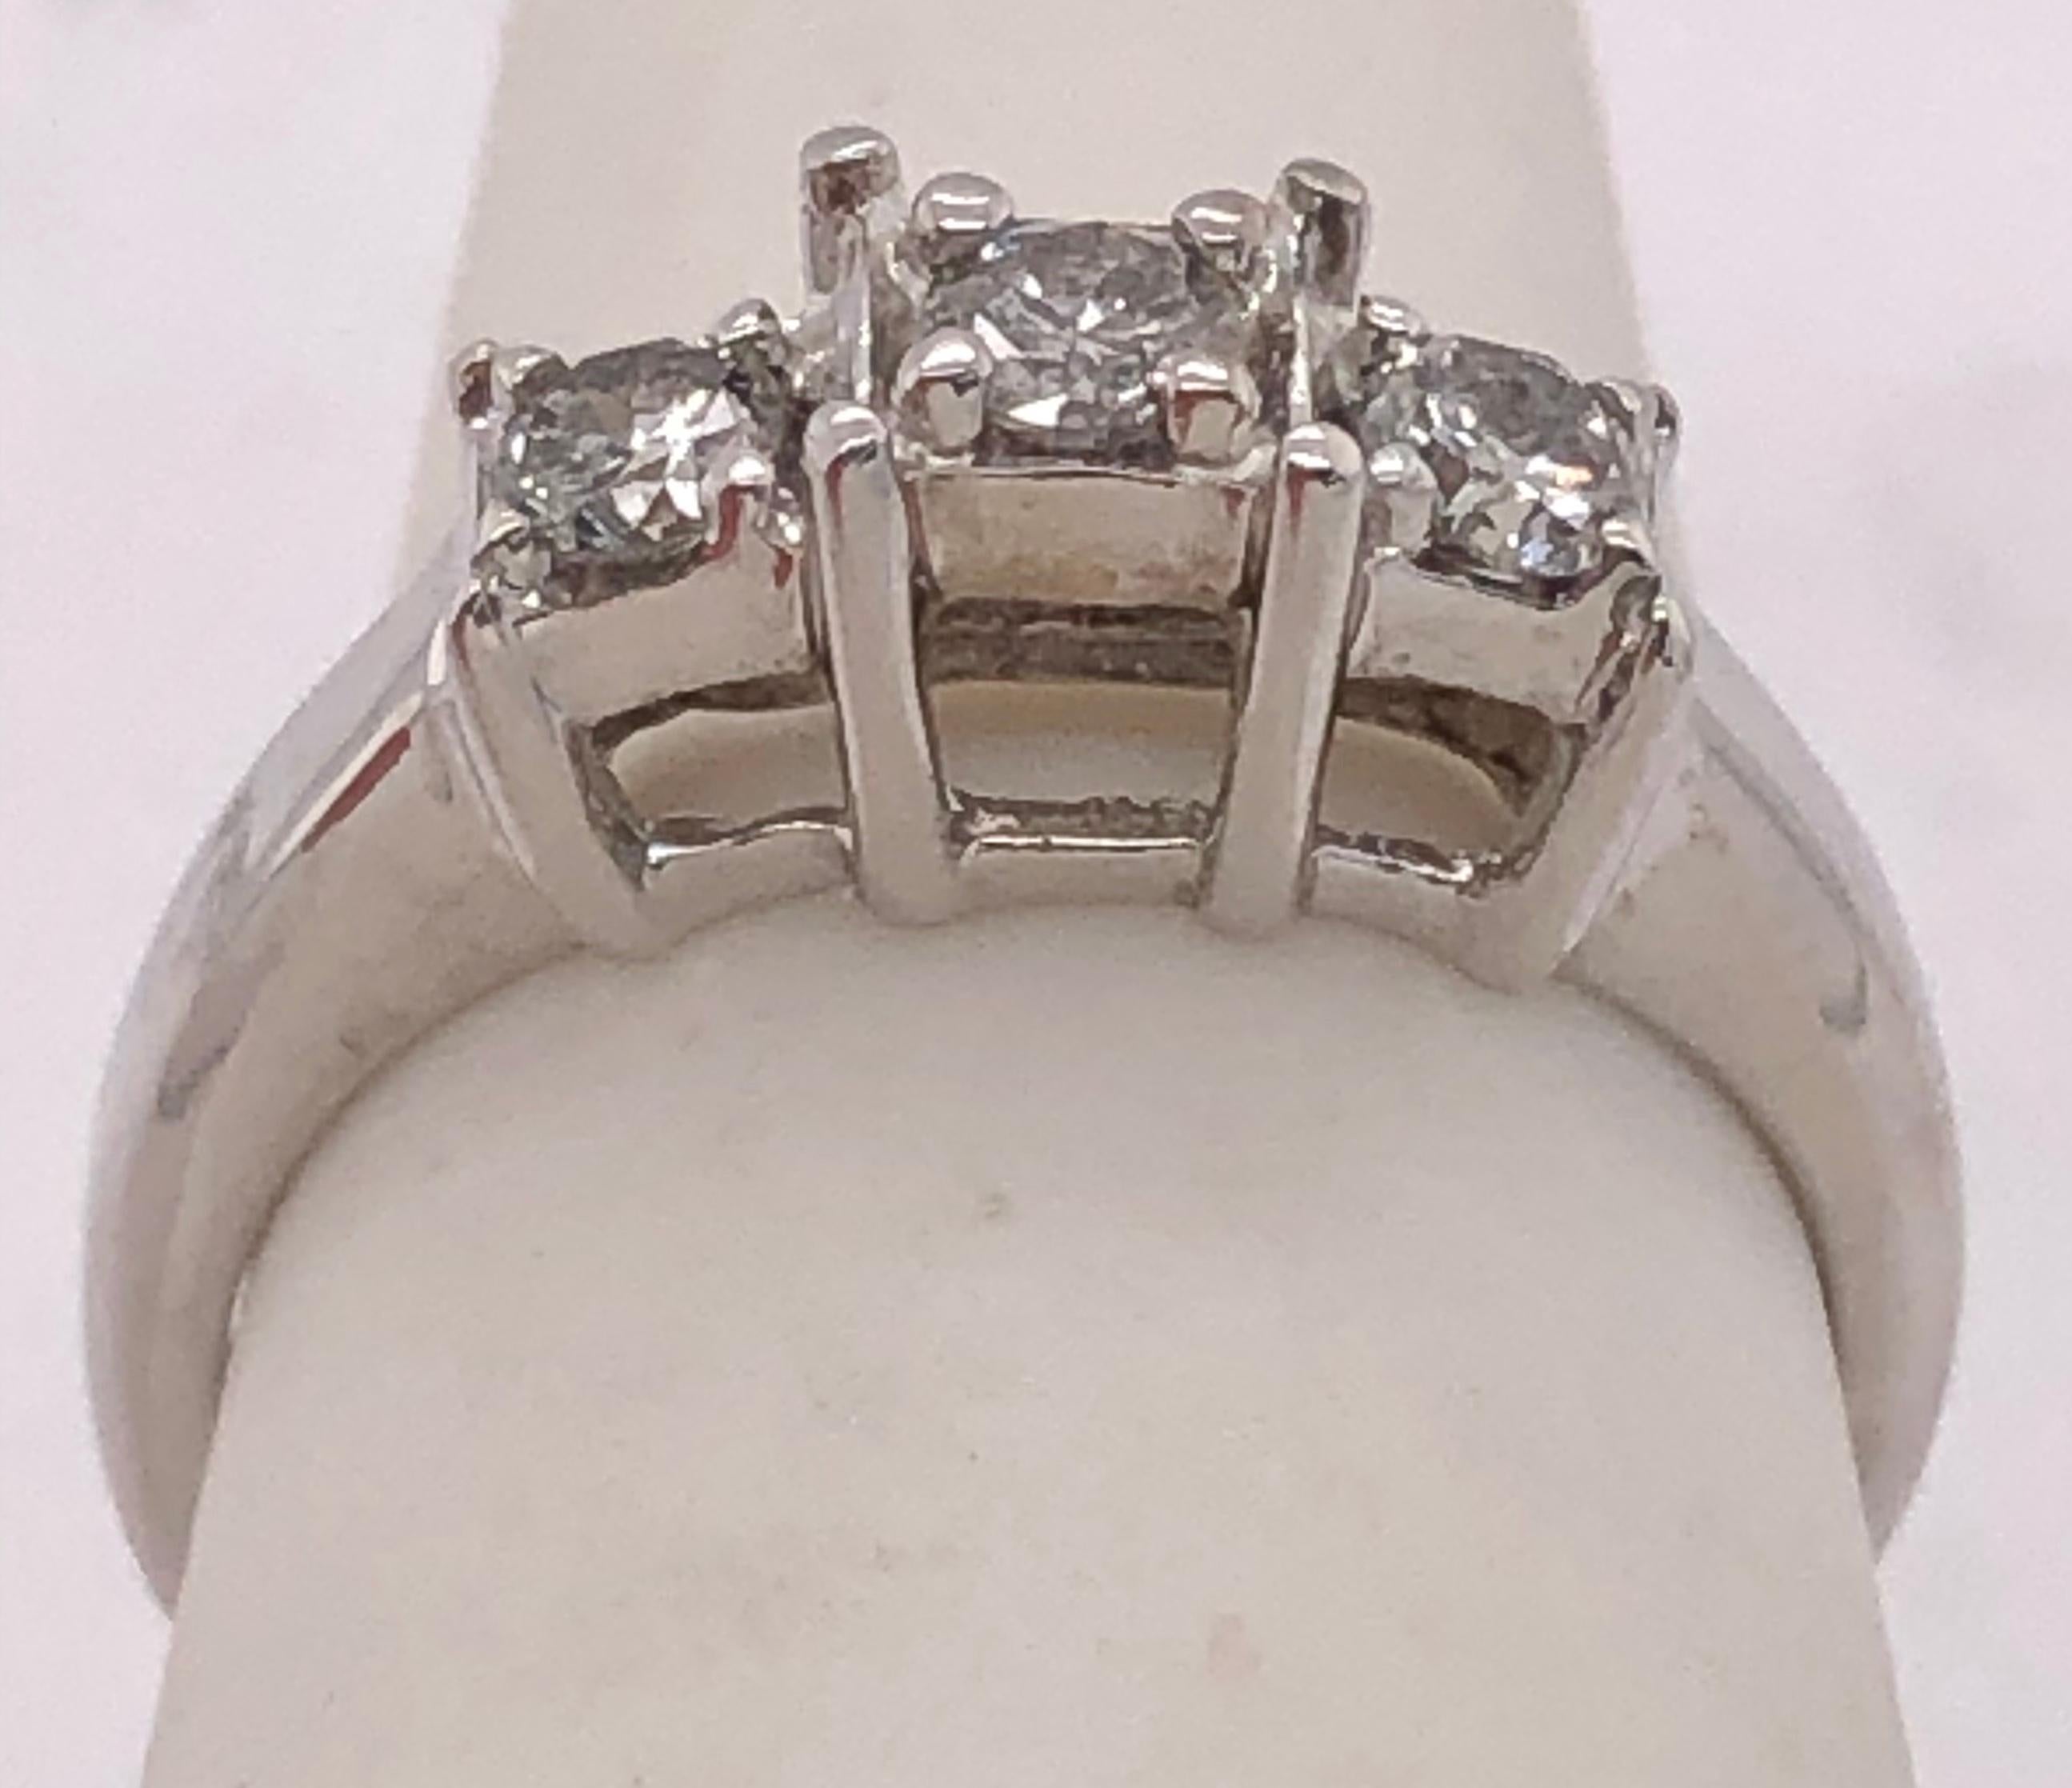 14Kt White Gold Three Stone Ring 0.20 Total Diamond Weight
Size 4.5 with 2.18 grams Total weight